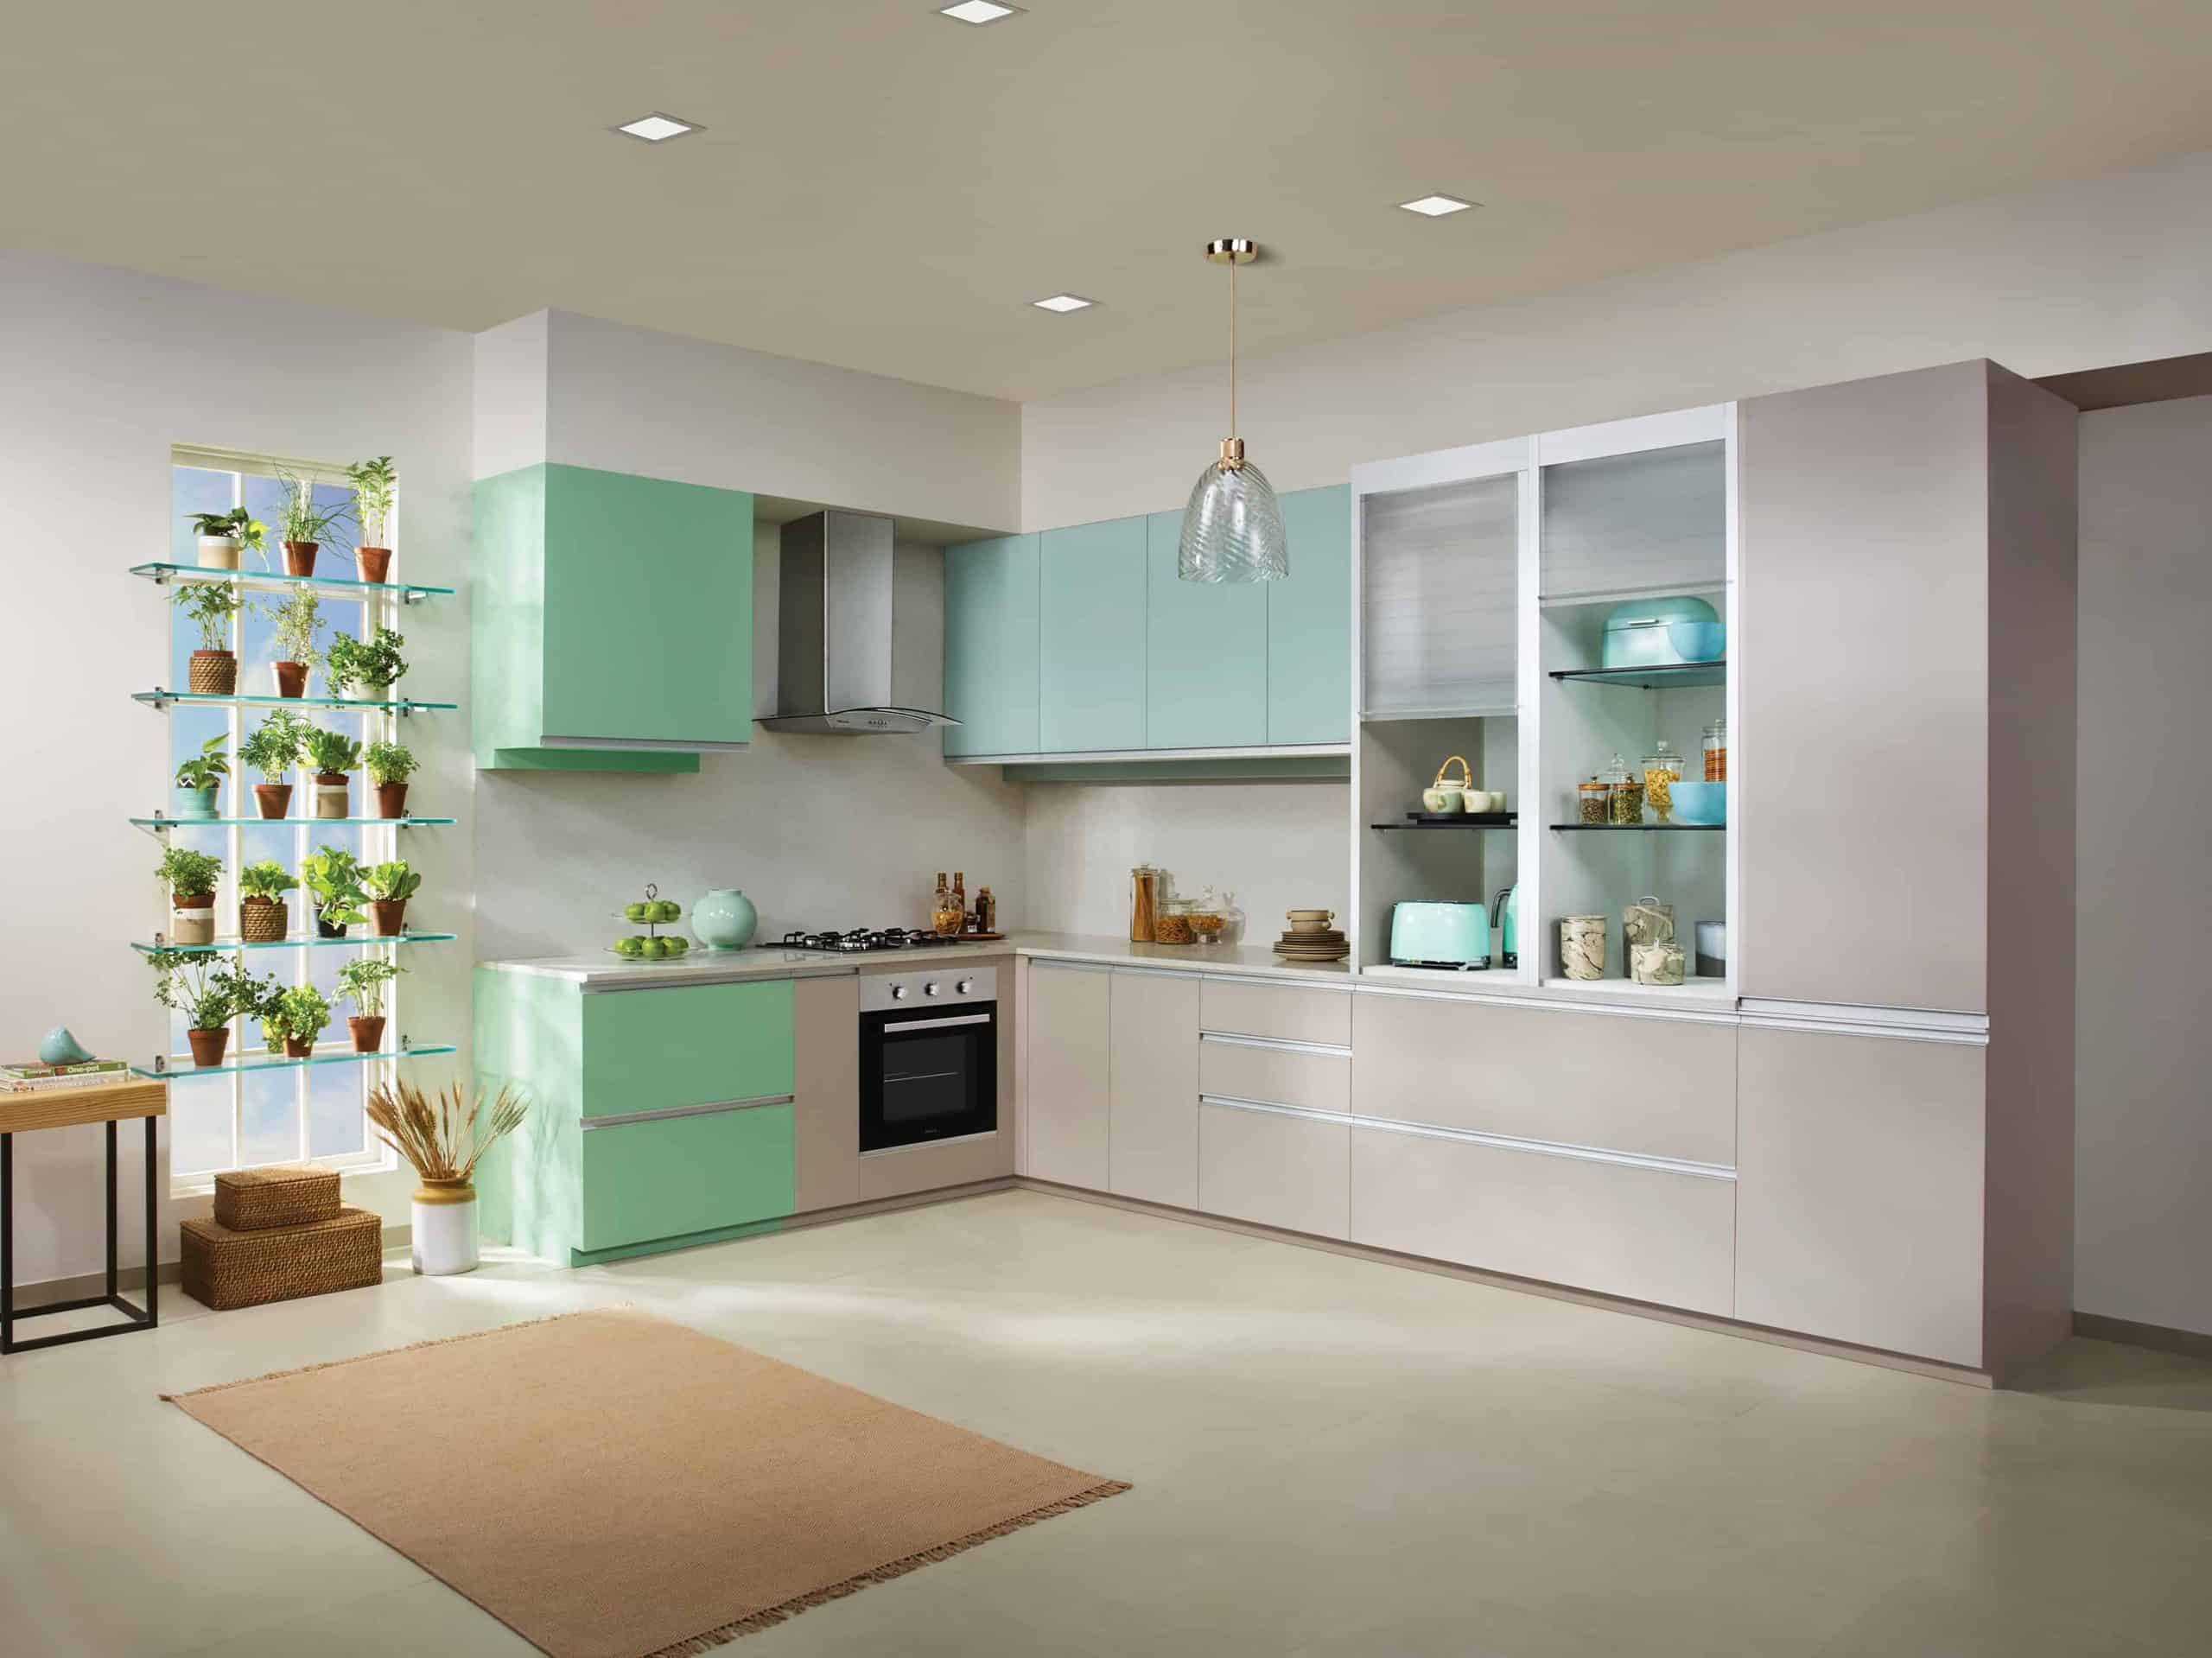 A cool white and green colored modern kitchen cabinet in a large kitchen area.